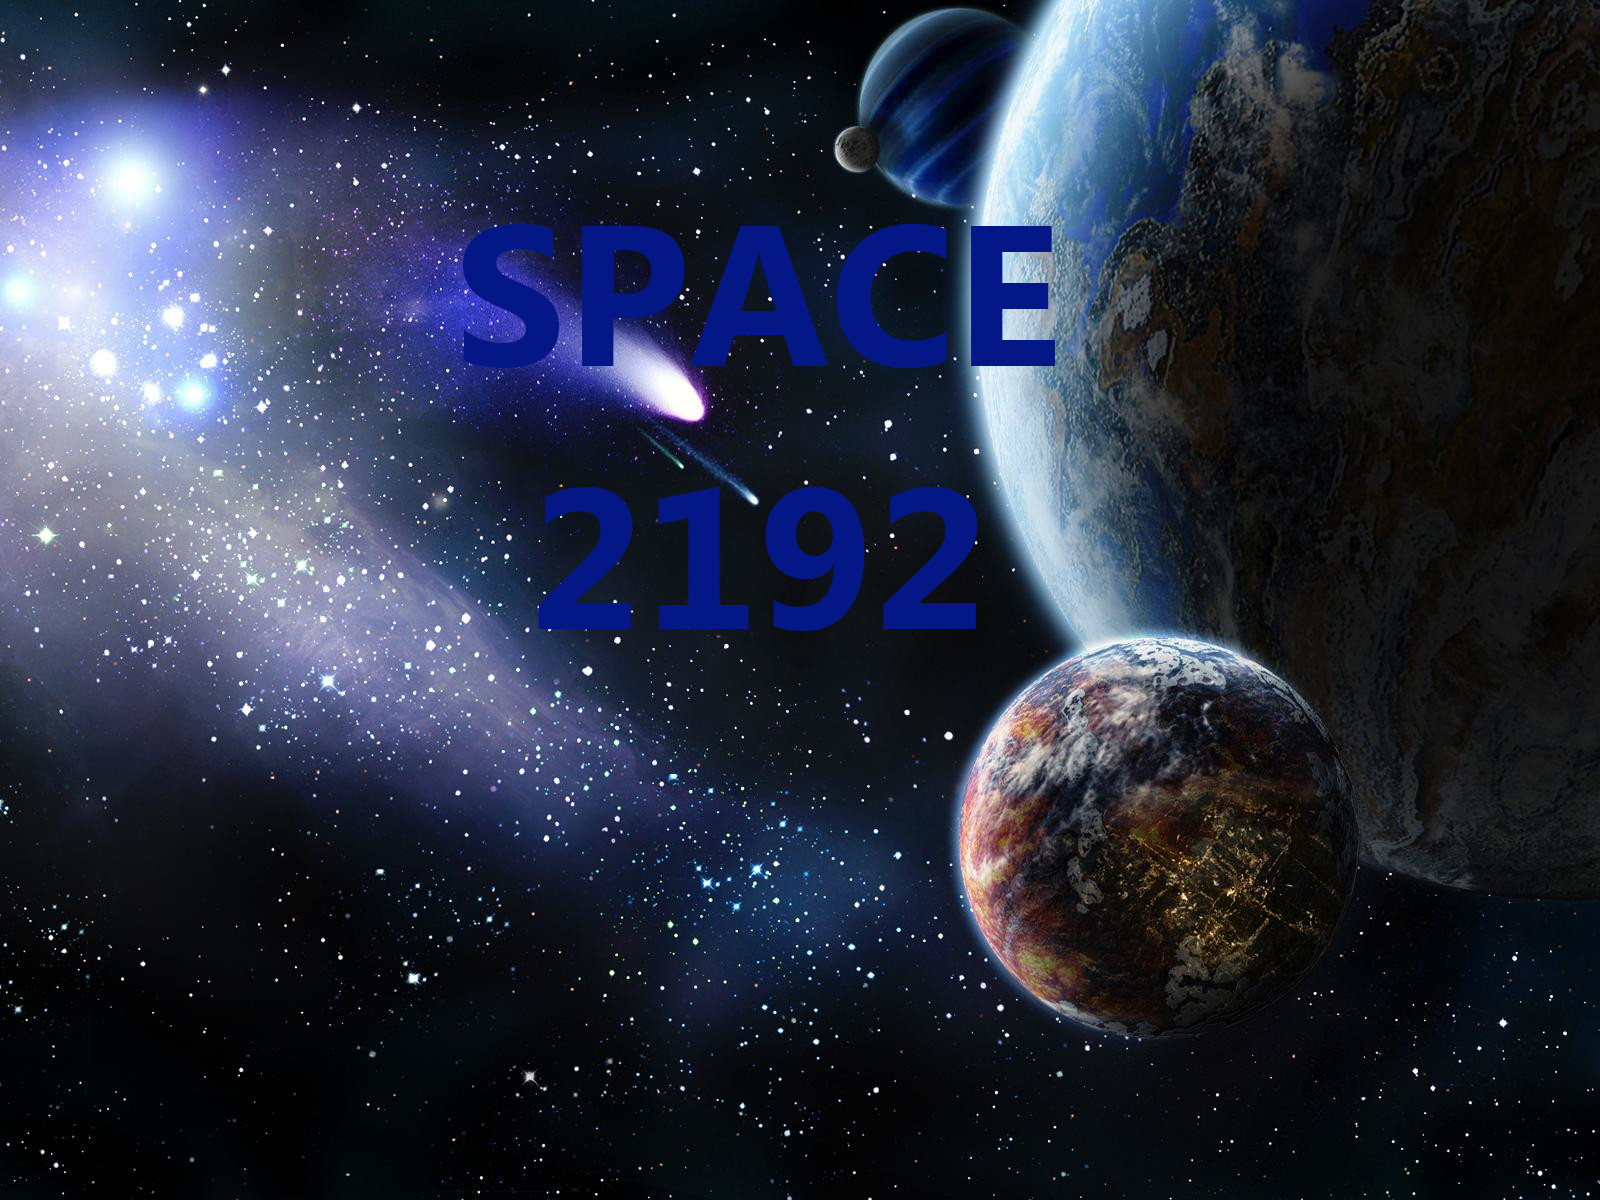 Space 2192